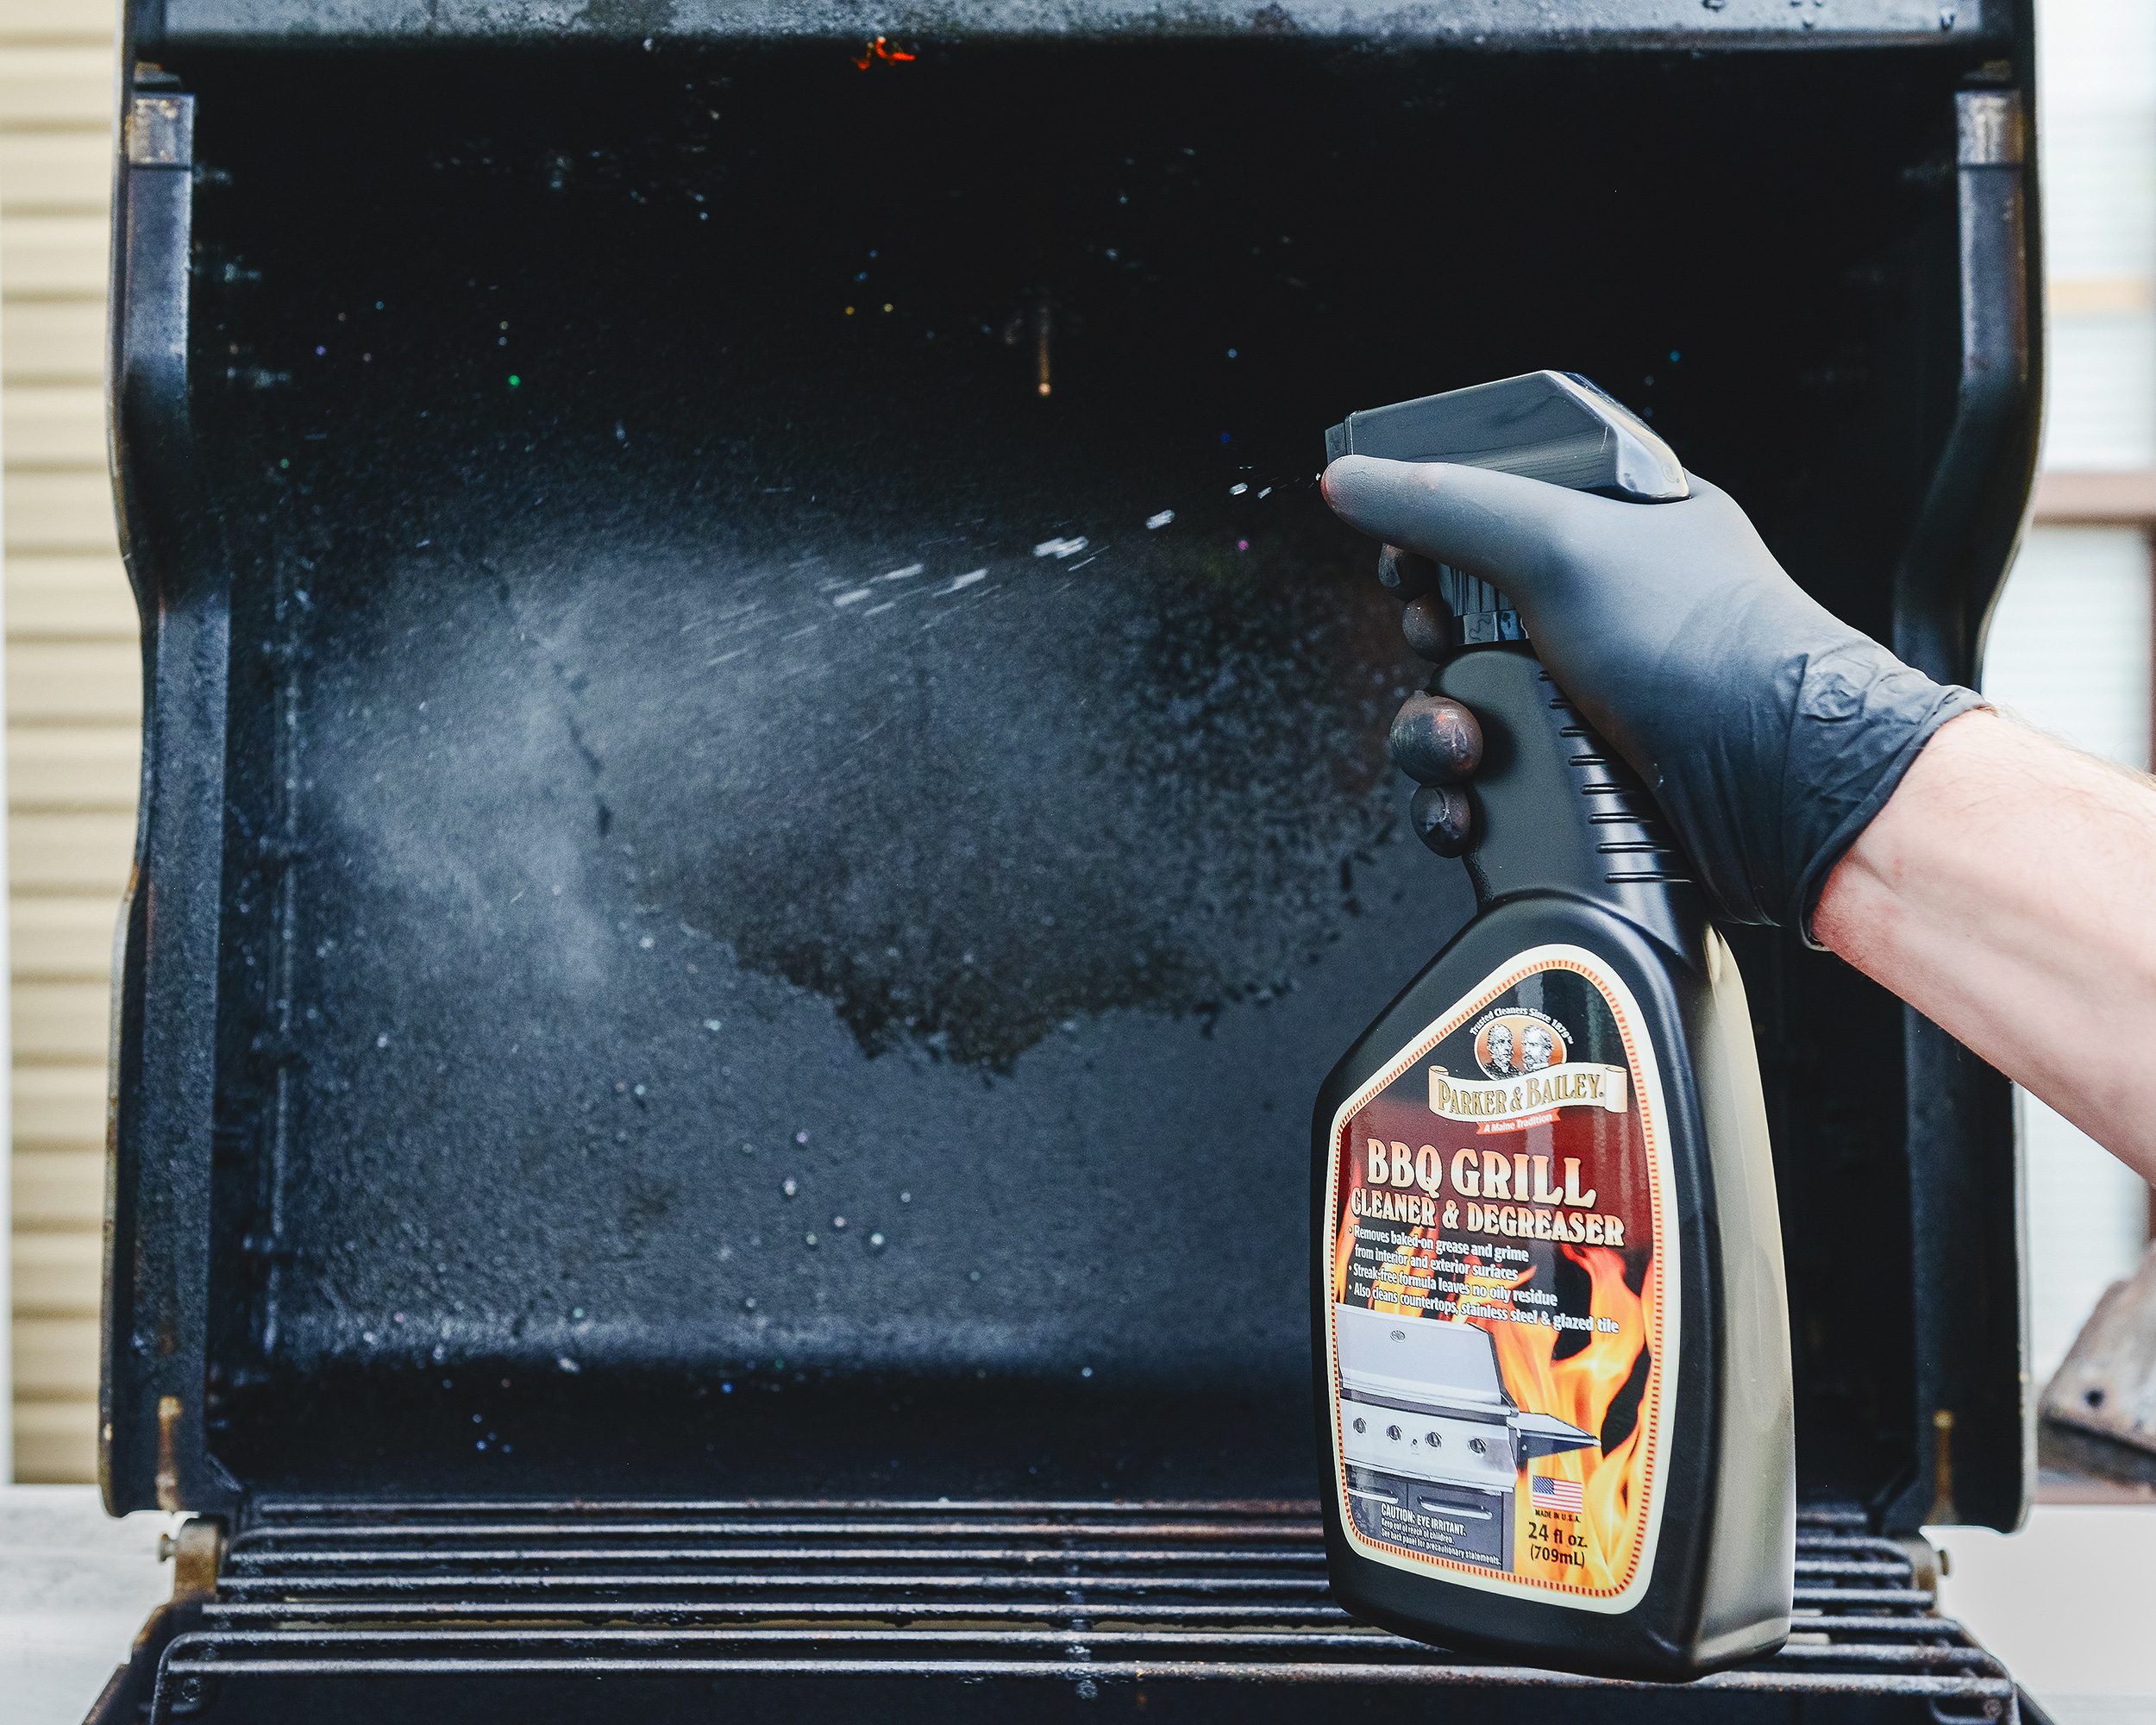 BBQ grill cleaning spray is used to degrease the inside of a weber gas grill // via yellow brick home